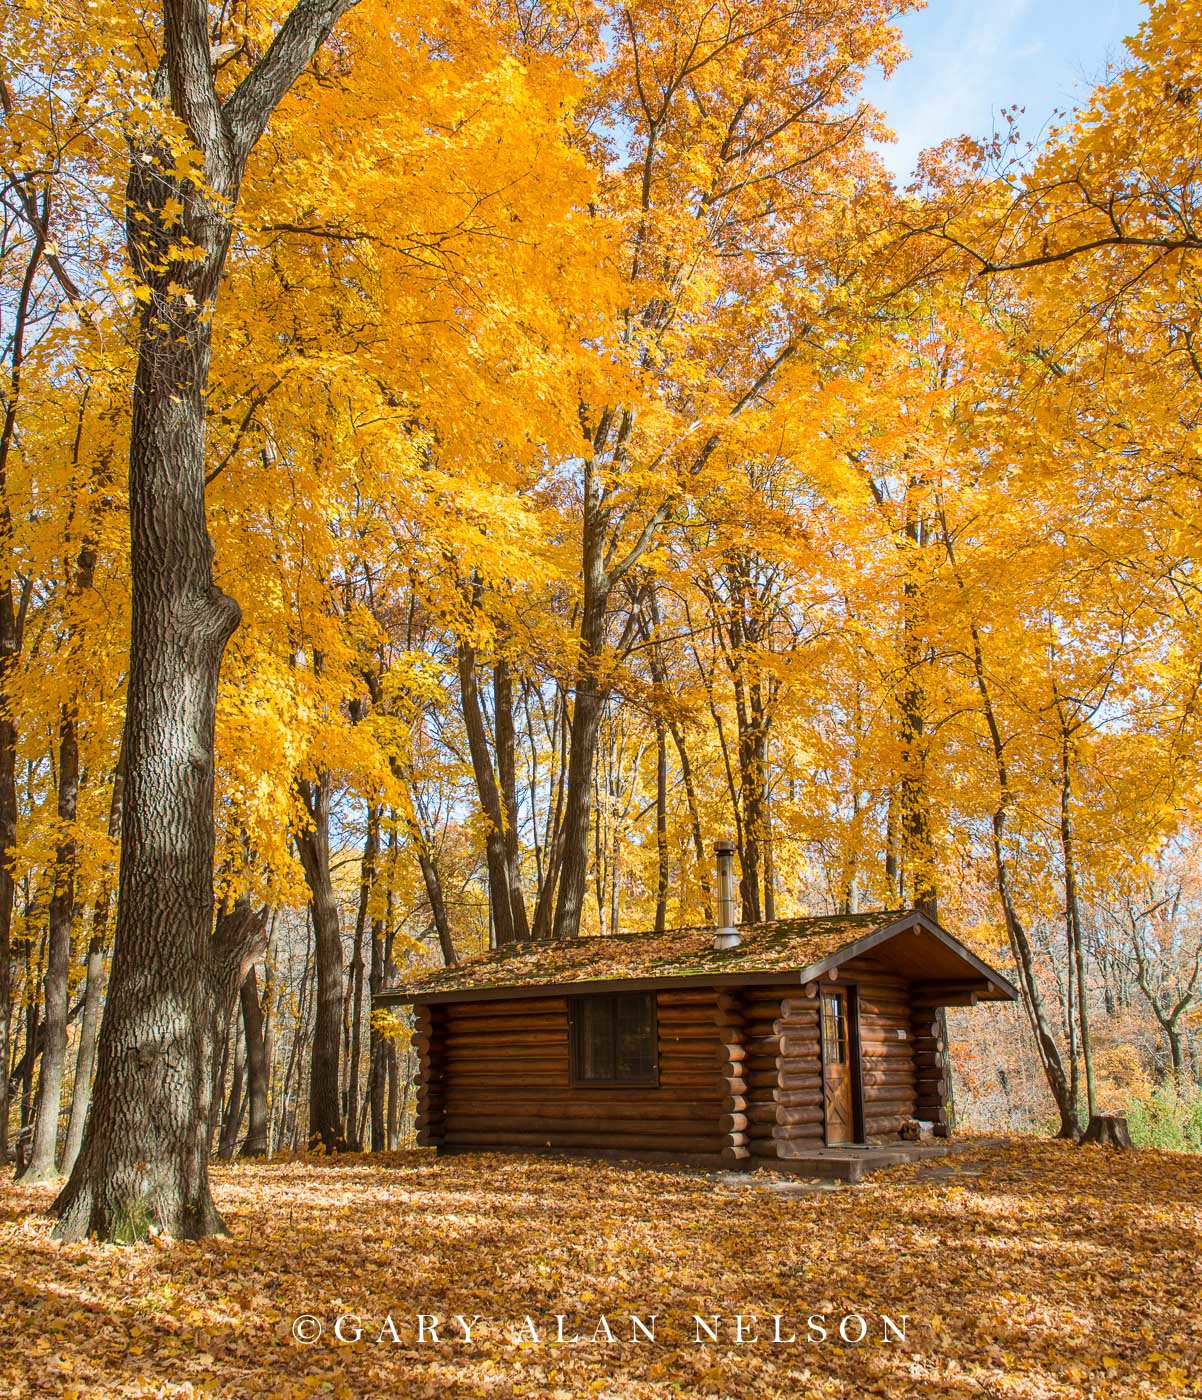 Log cabin in the thros of autumn, Lake Maria State Park, Minnesota